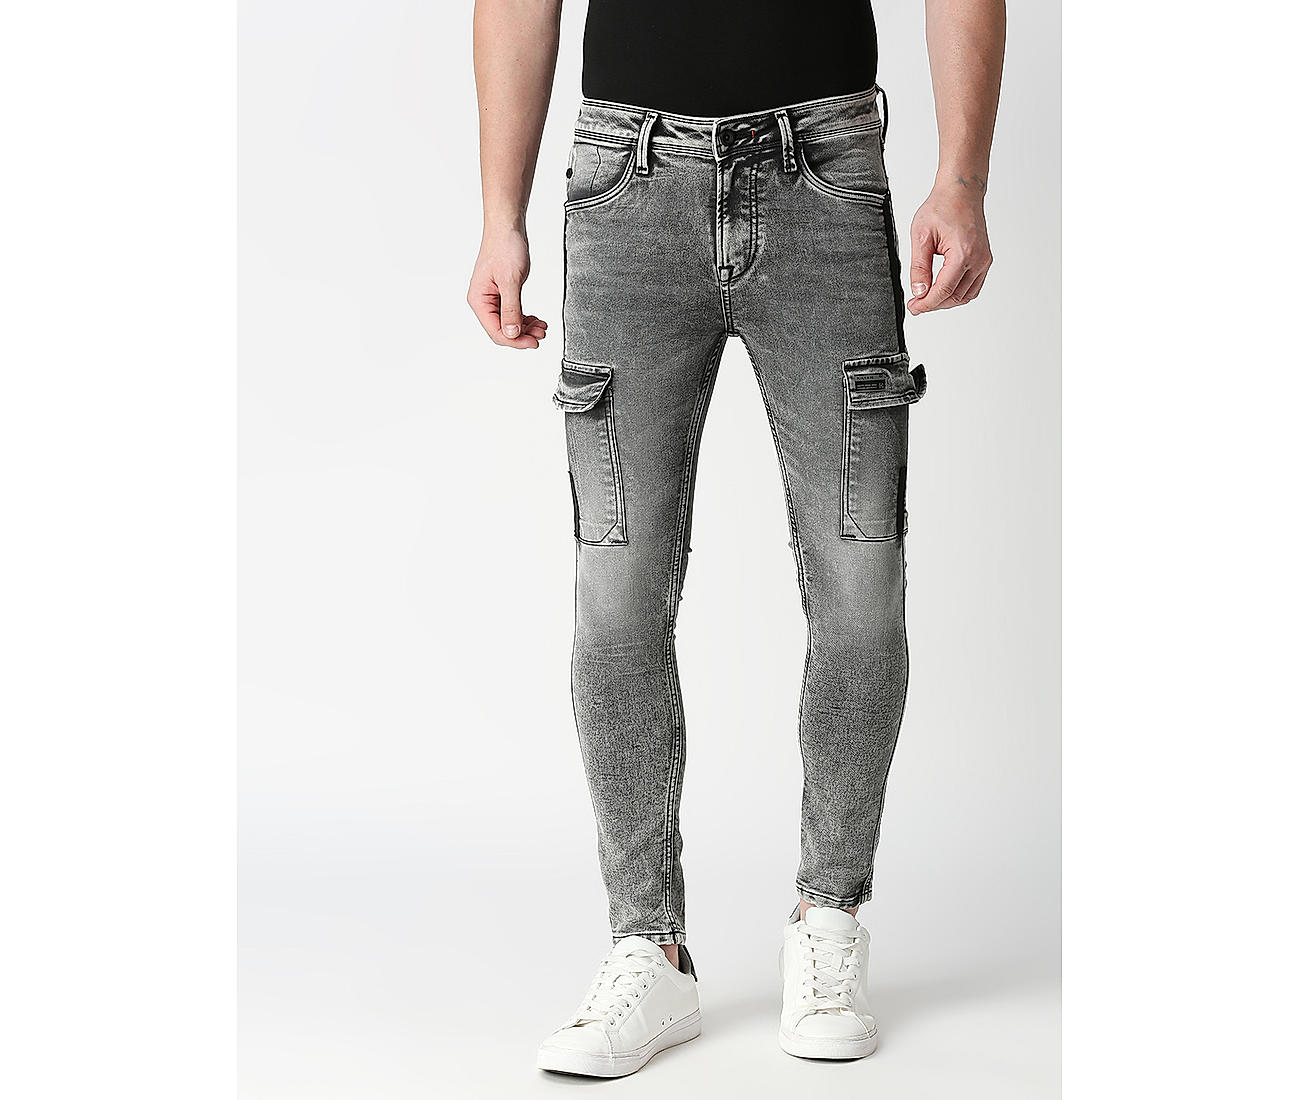 Shop Denim Cargo Pants for Men from latest collection at Forever 21  370127